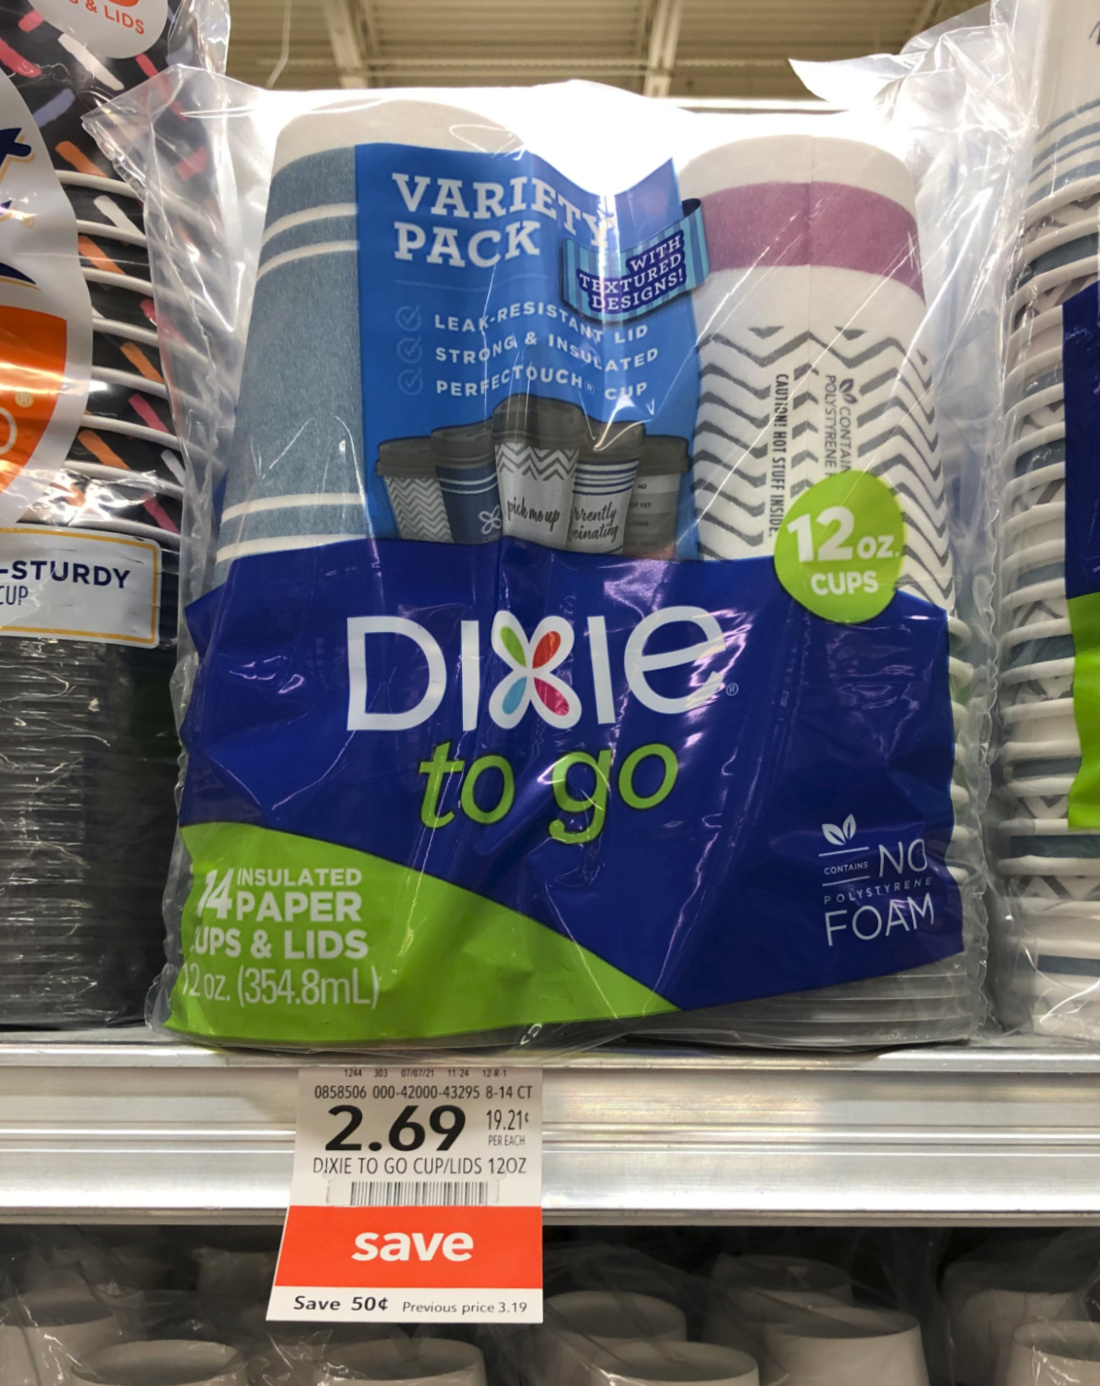 Dixie To Go Cups As Low As $1.65 At Publix on I Heart Publix